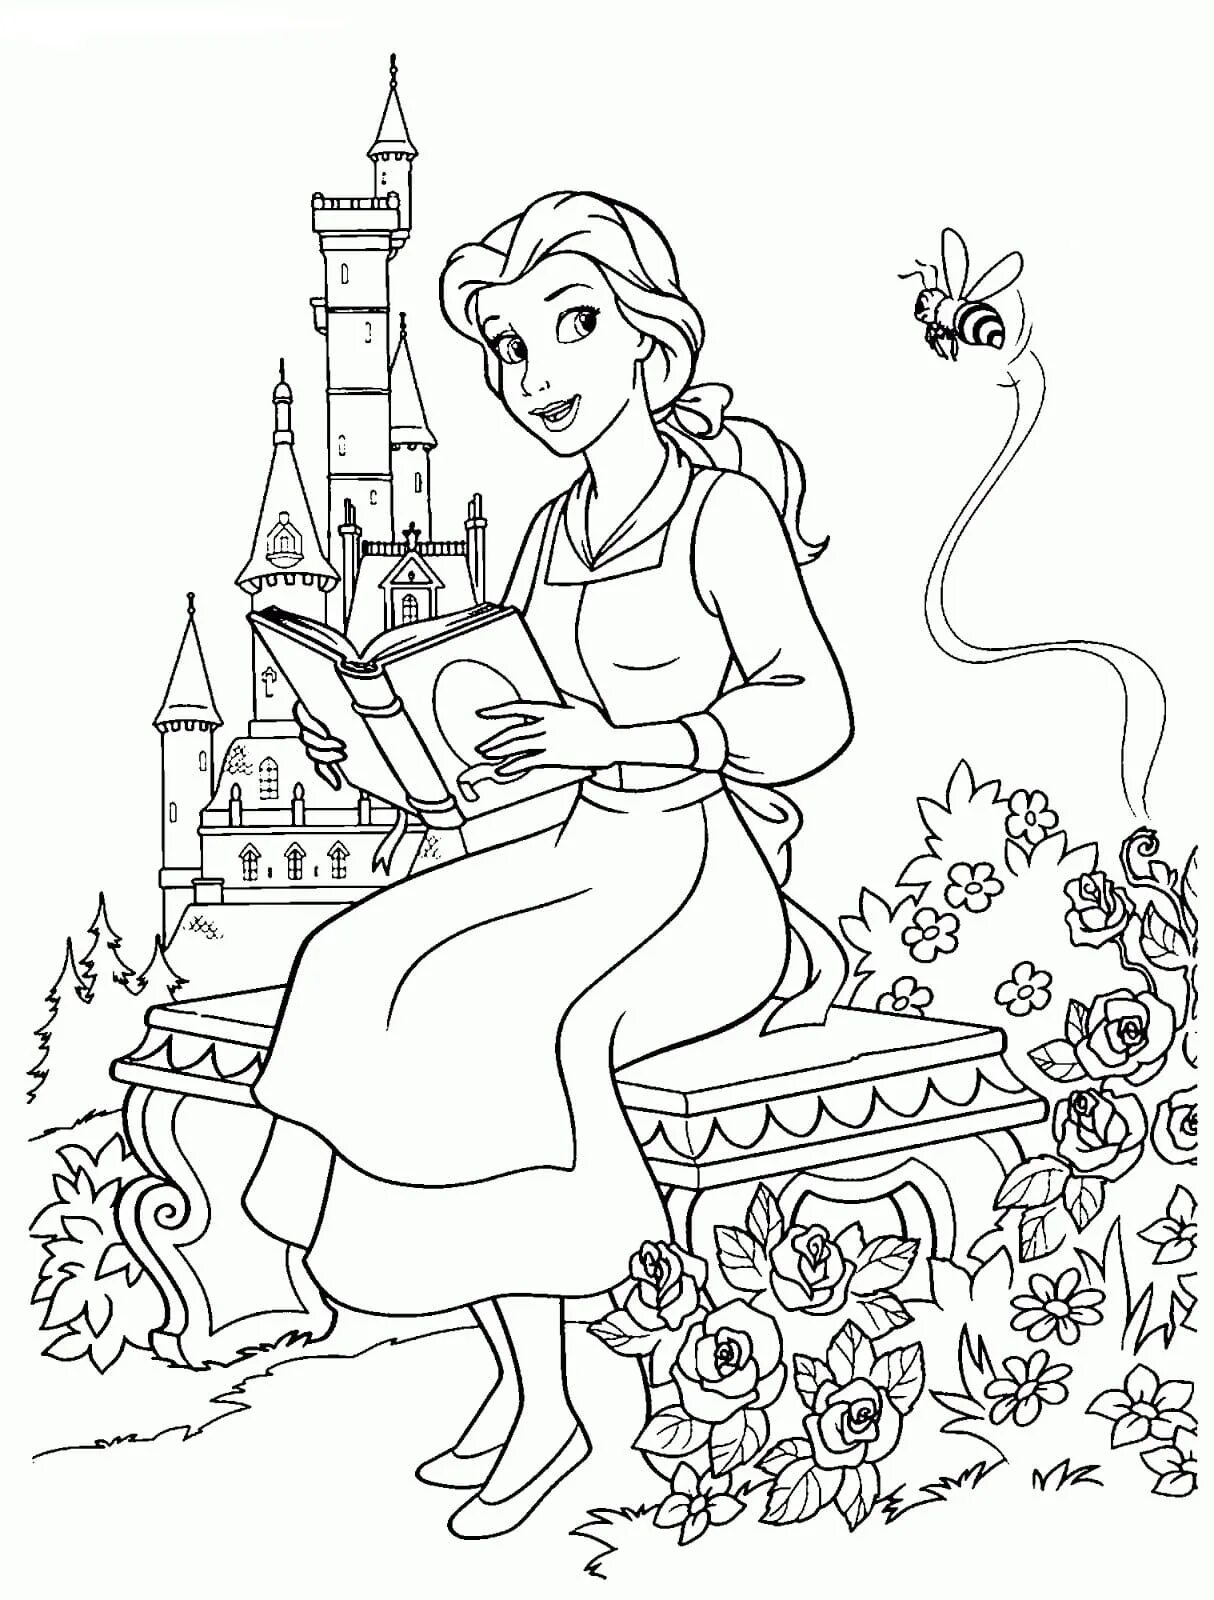 Charm lingerie coloring page